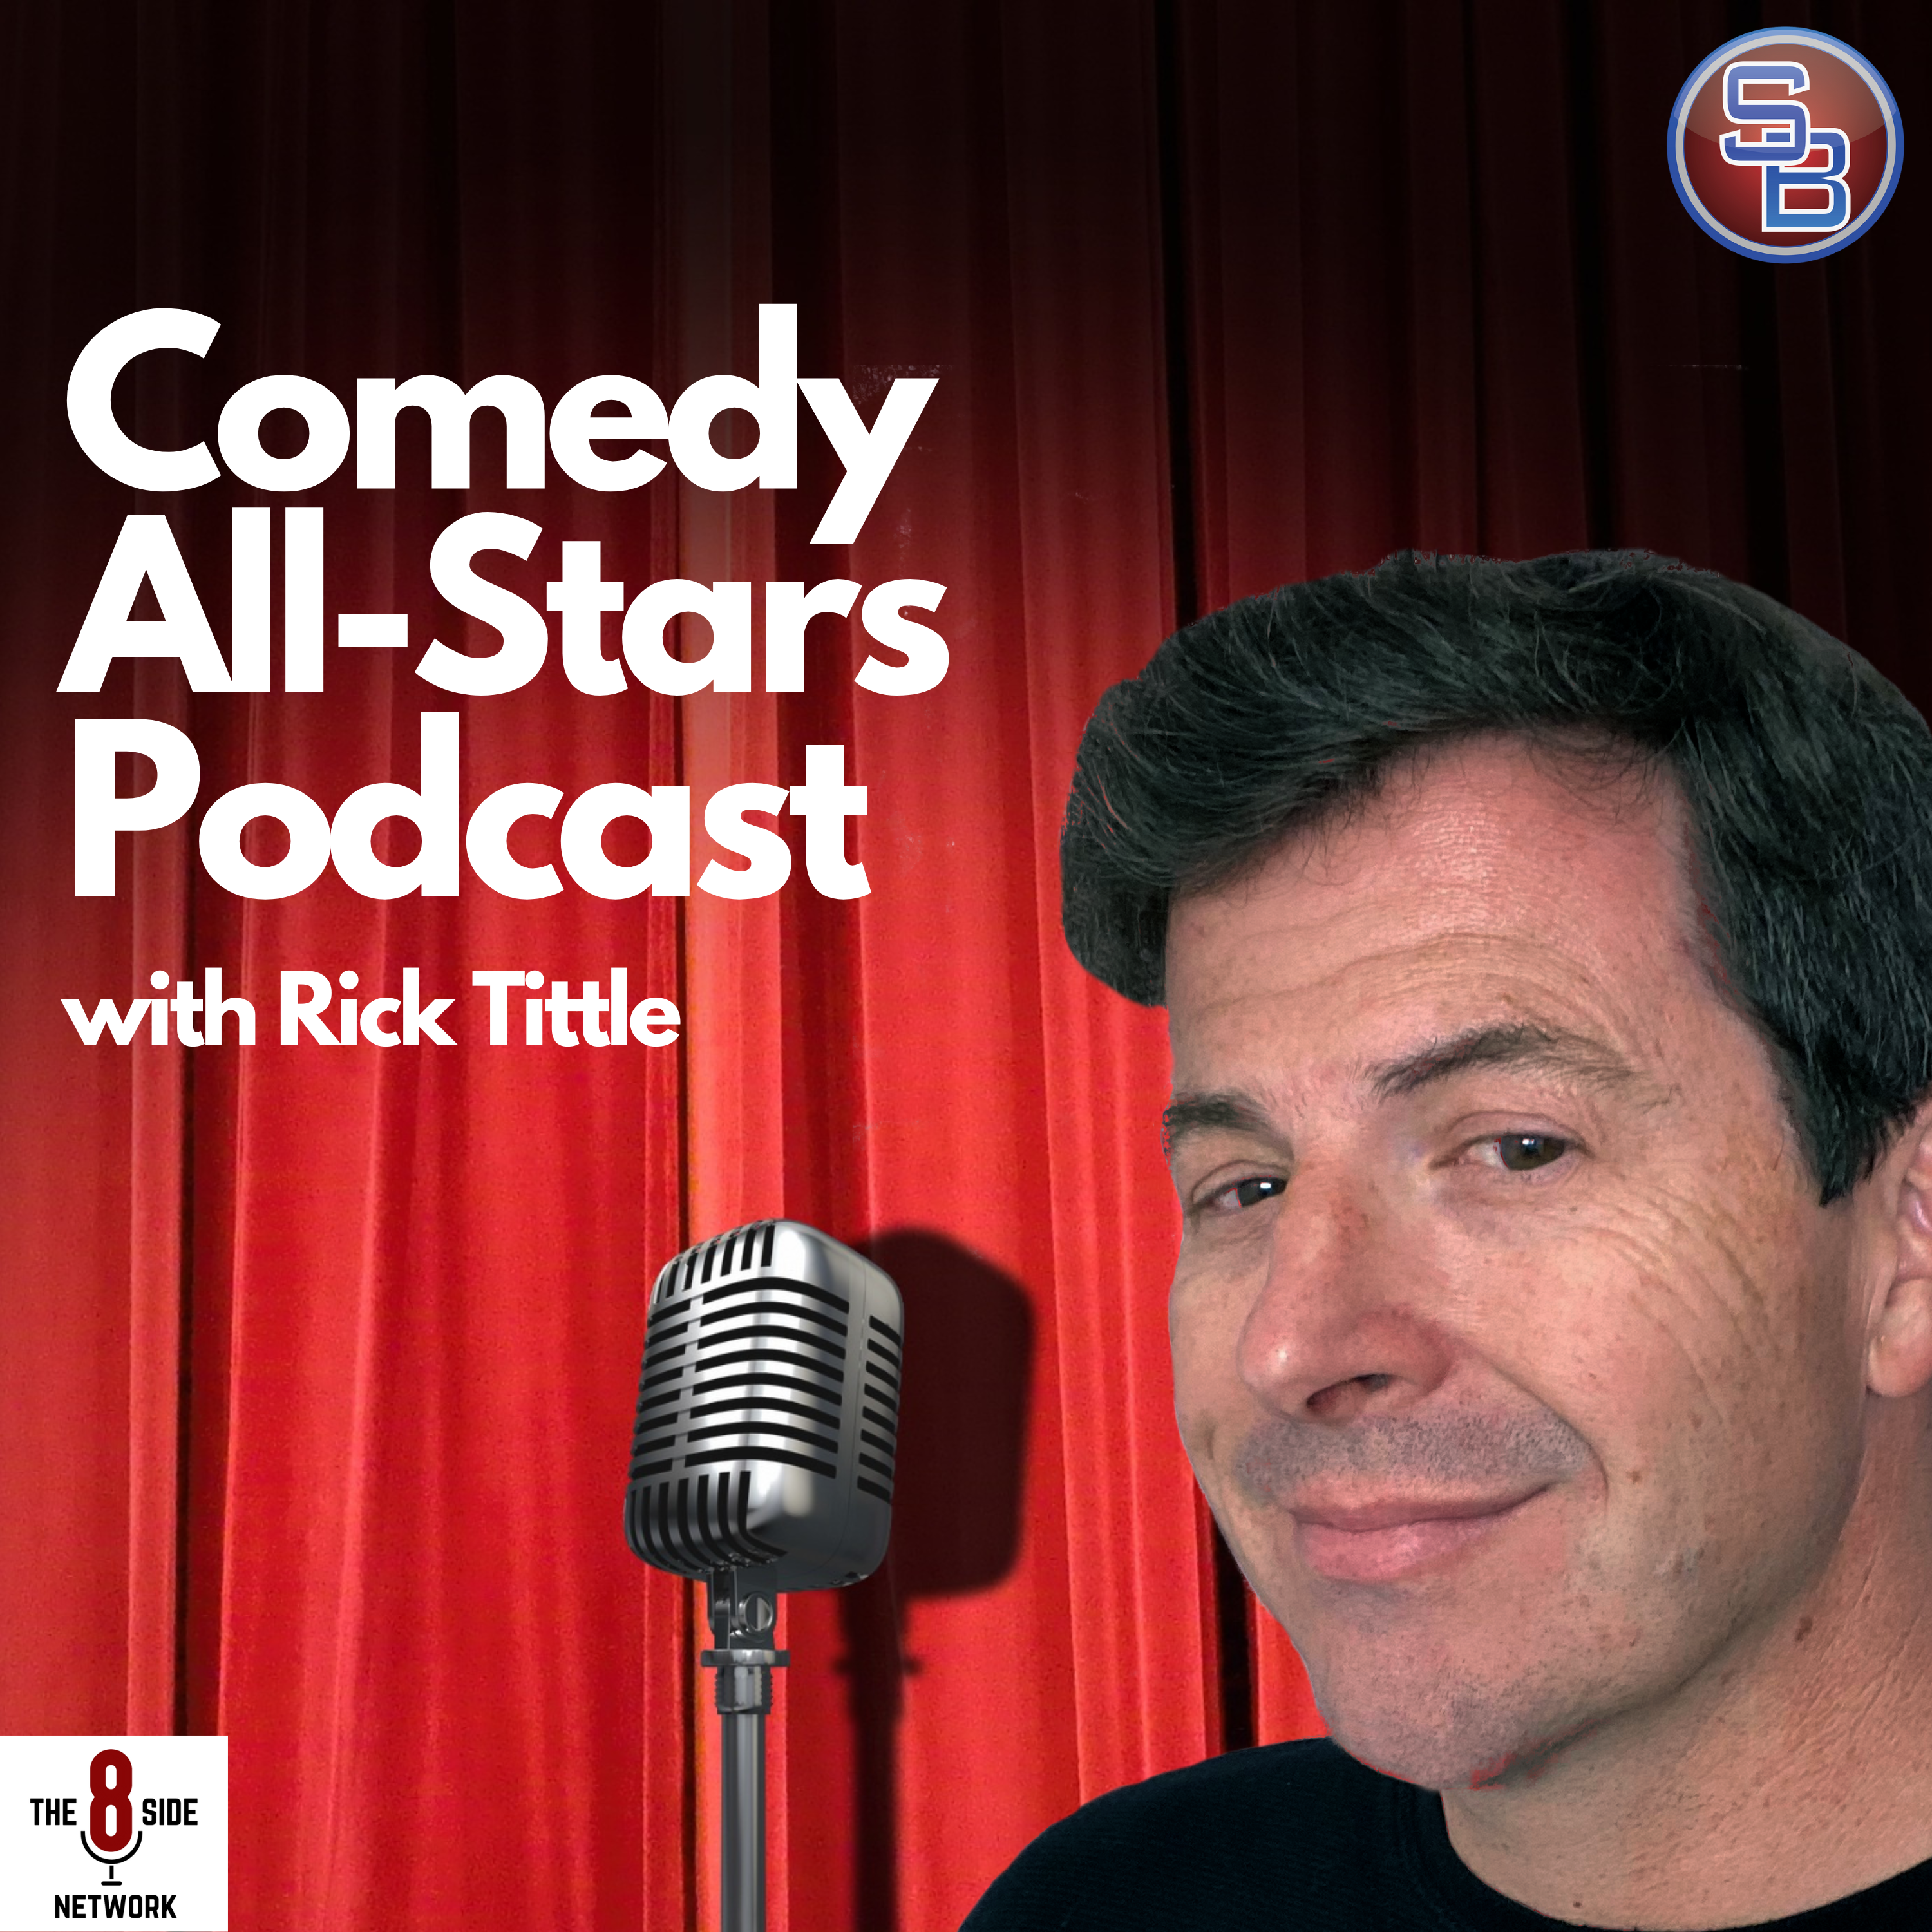 Comedy All-Stars Podcast with Rick Tittle